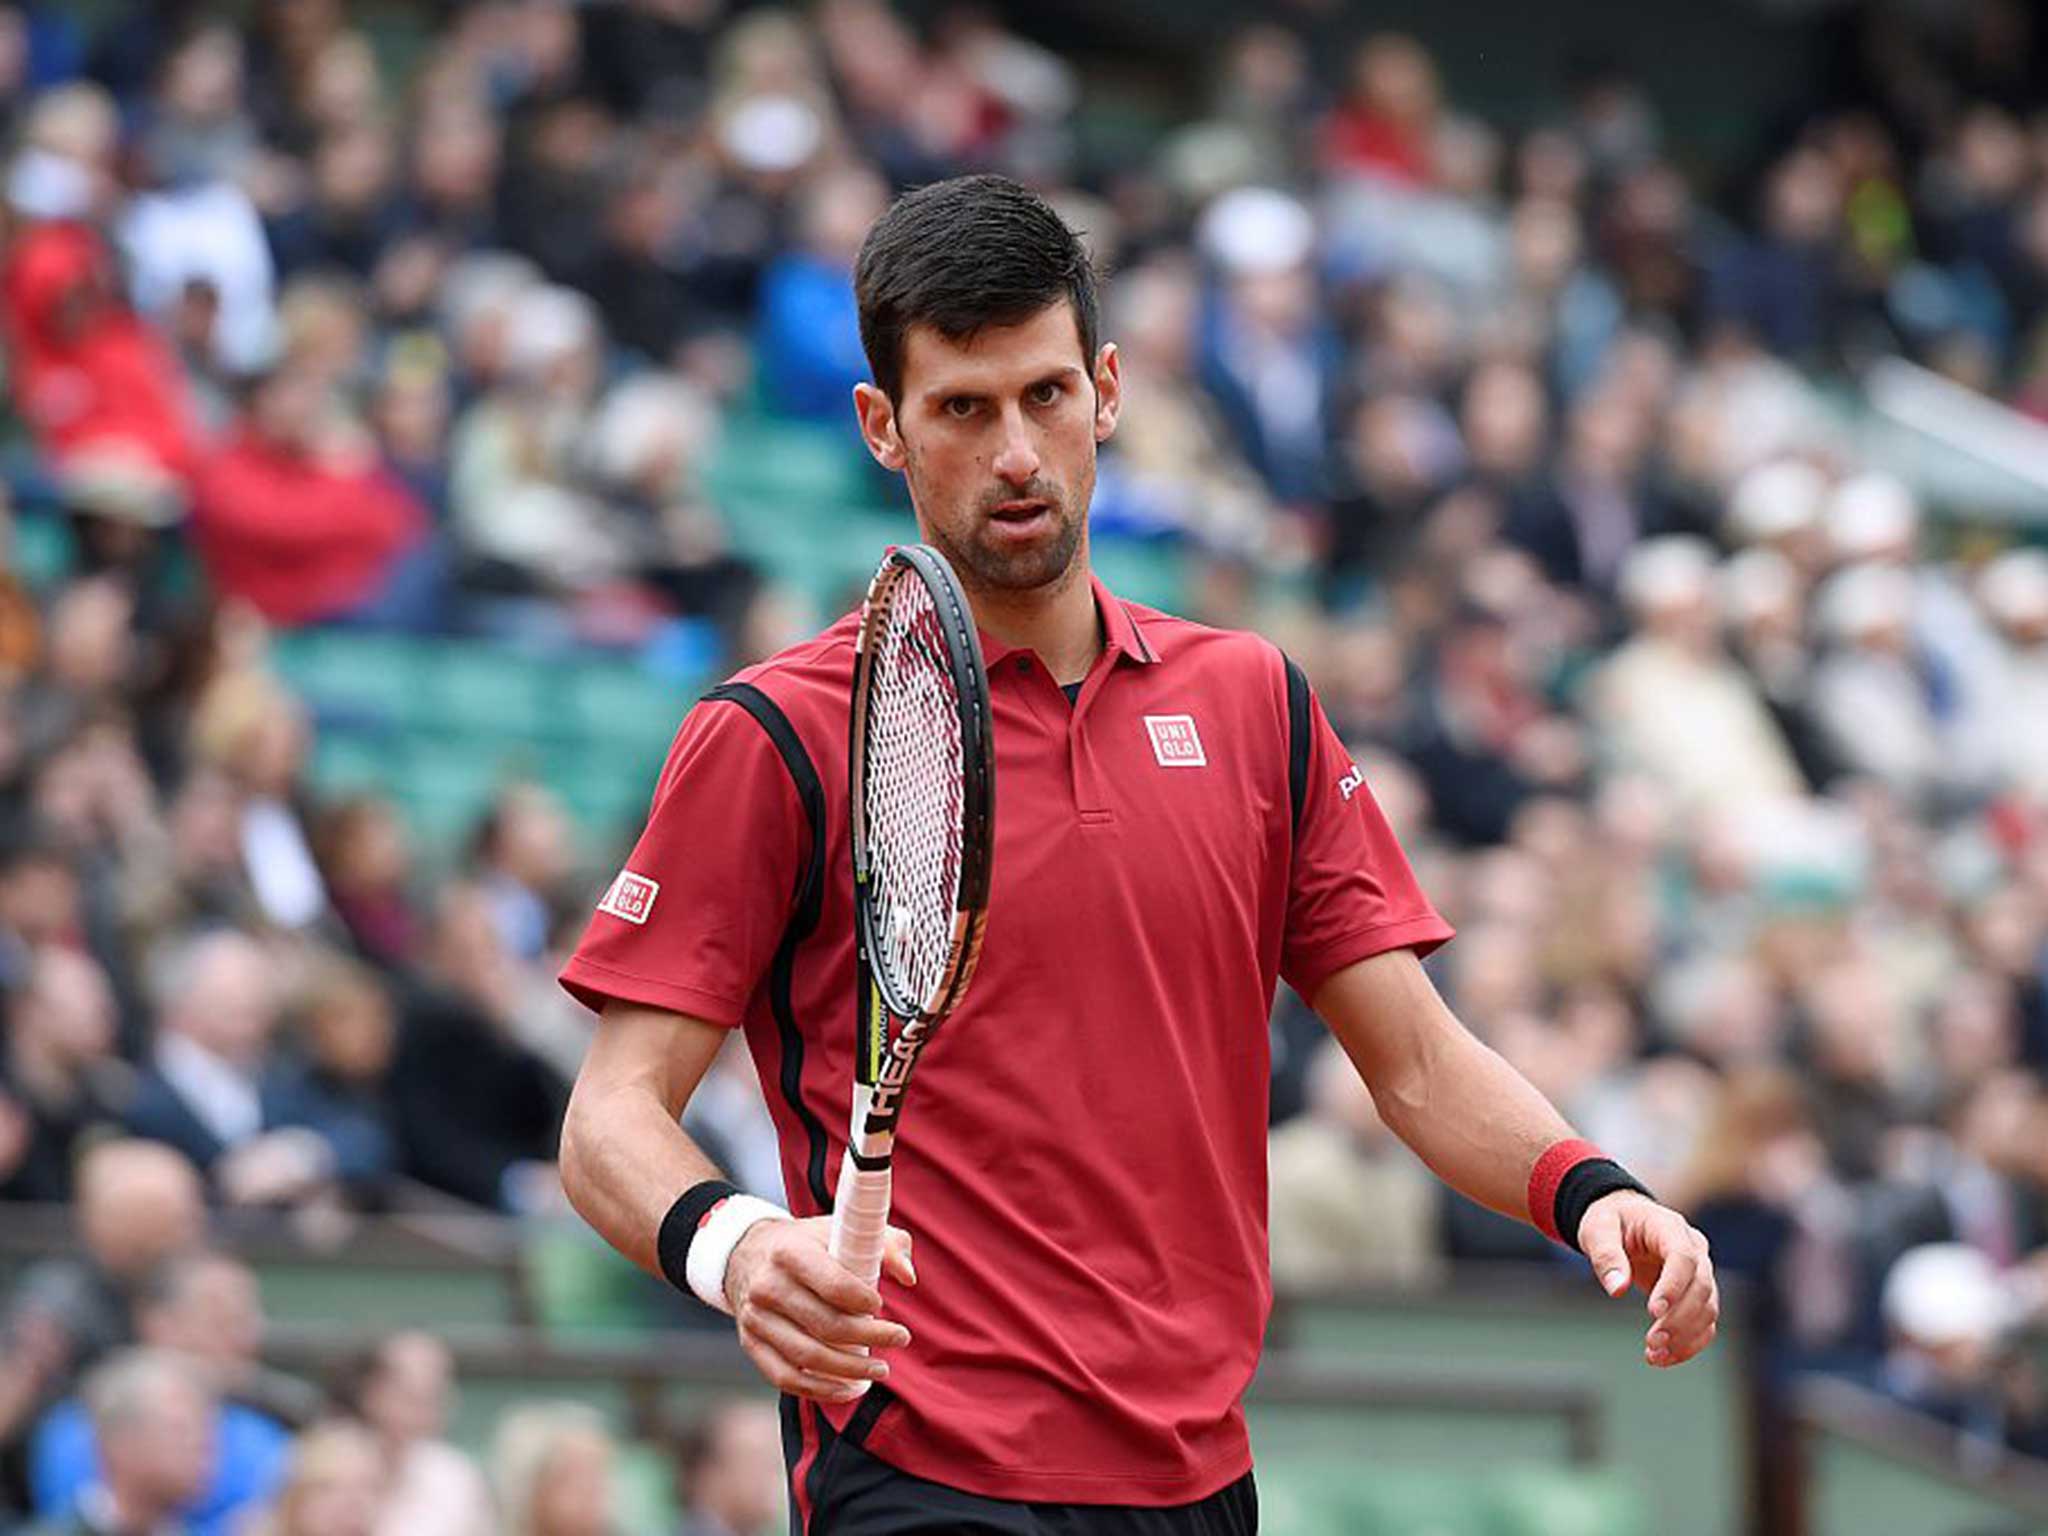 Novak Djokovic squeezed into the French Open semi-finals